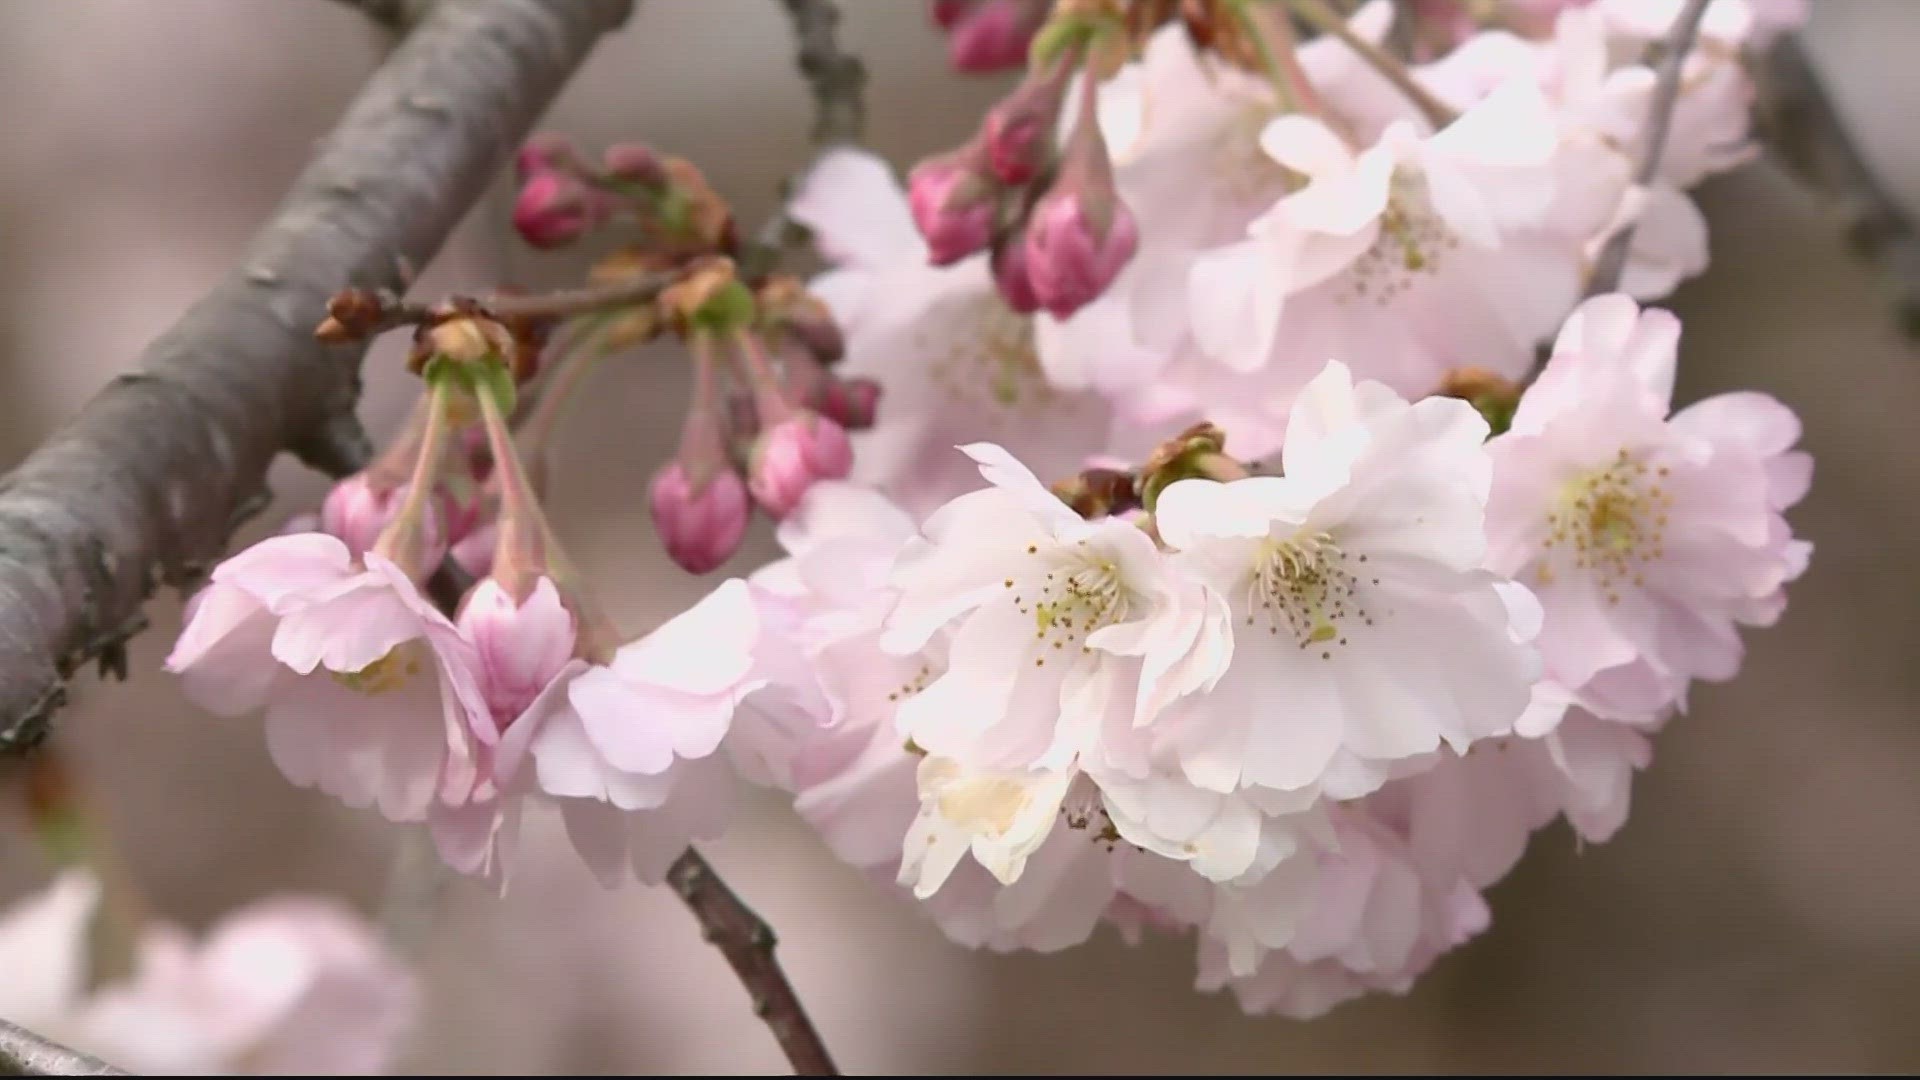 There are other spots in our area where you can enjoy those blooming blossoms. One of those places is the National Arboretum on New York Avenue in Northeast.